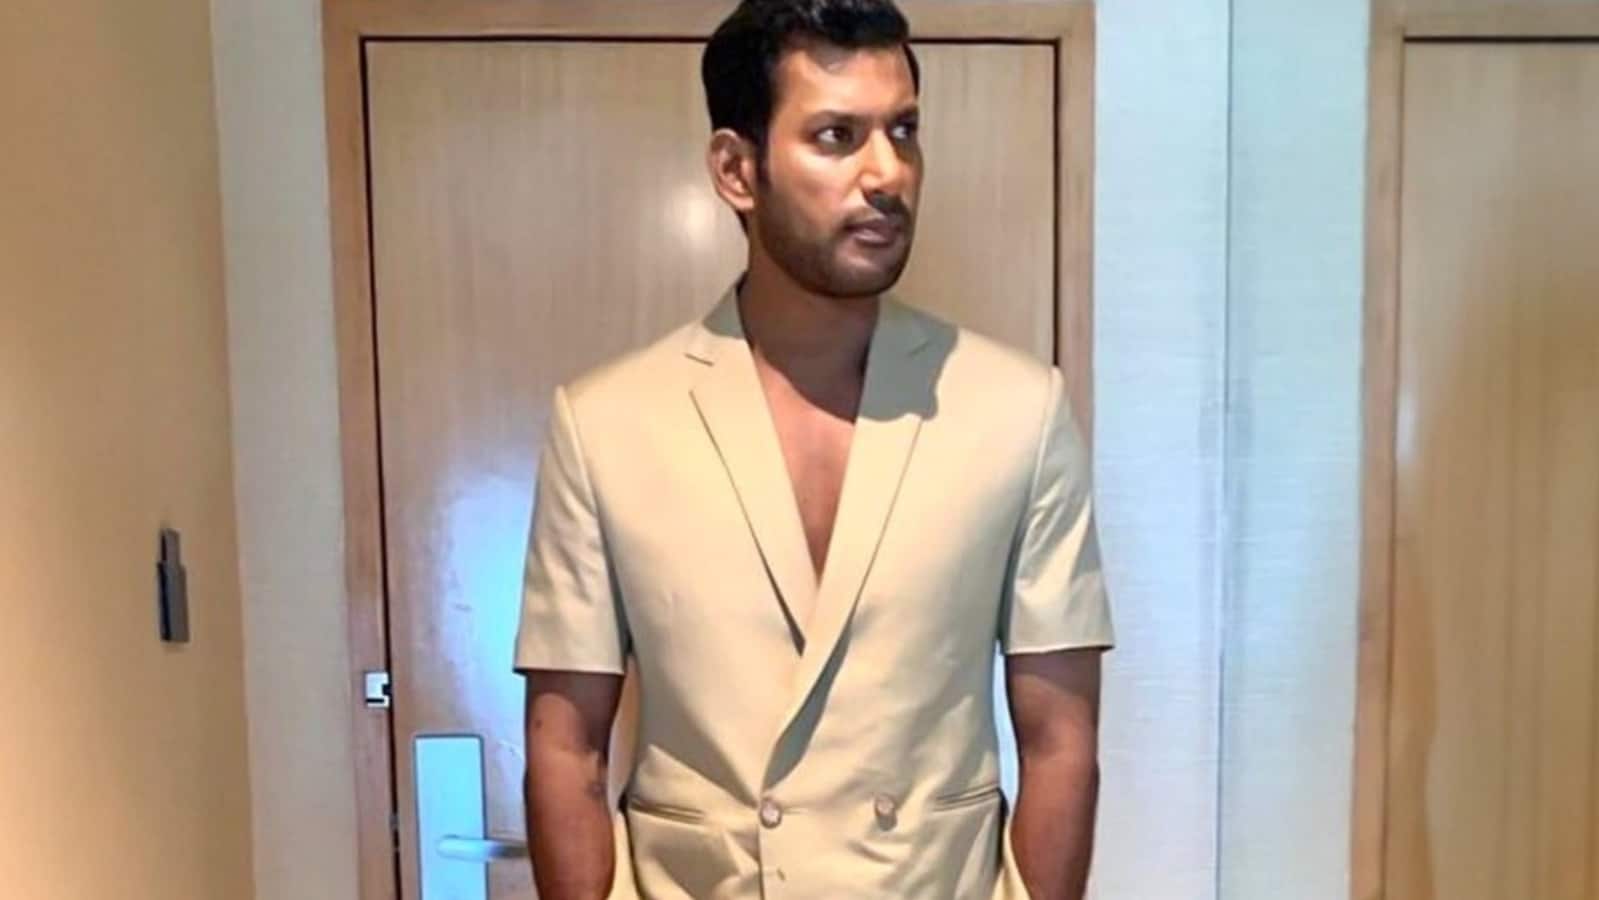 Vishal reveals the truth behind his video with mystery woman: It’s just a prank